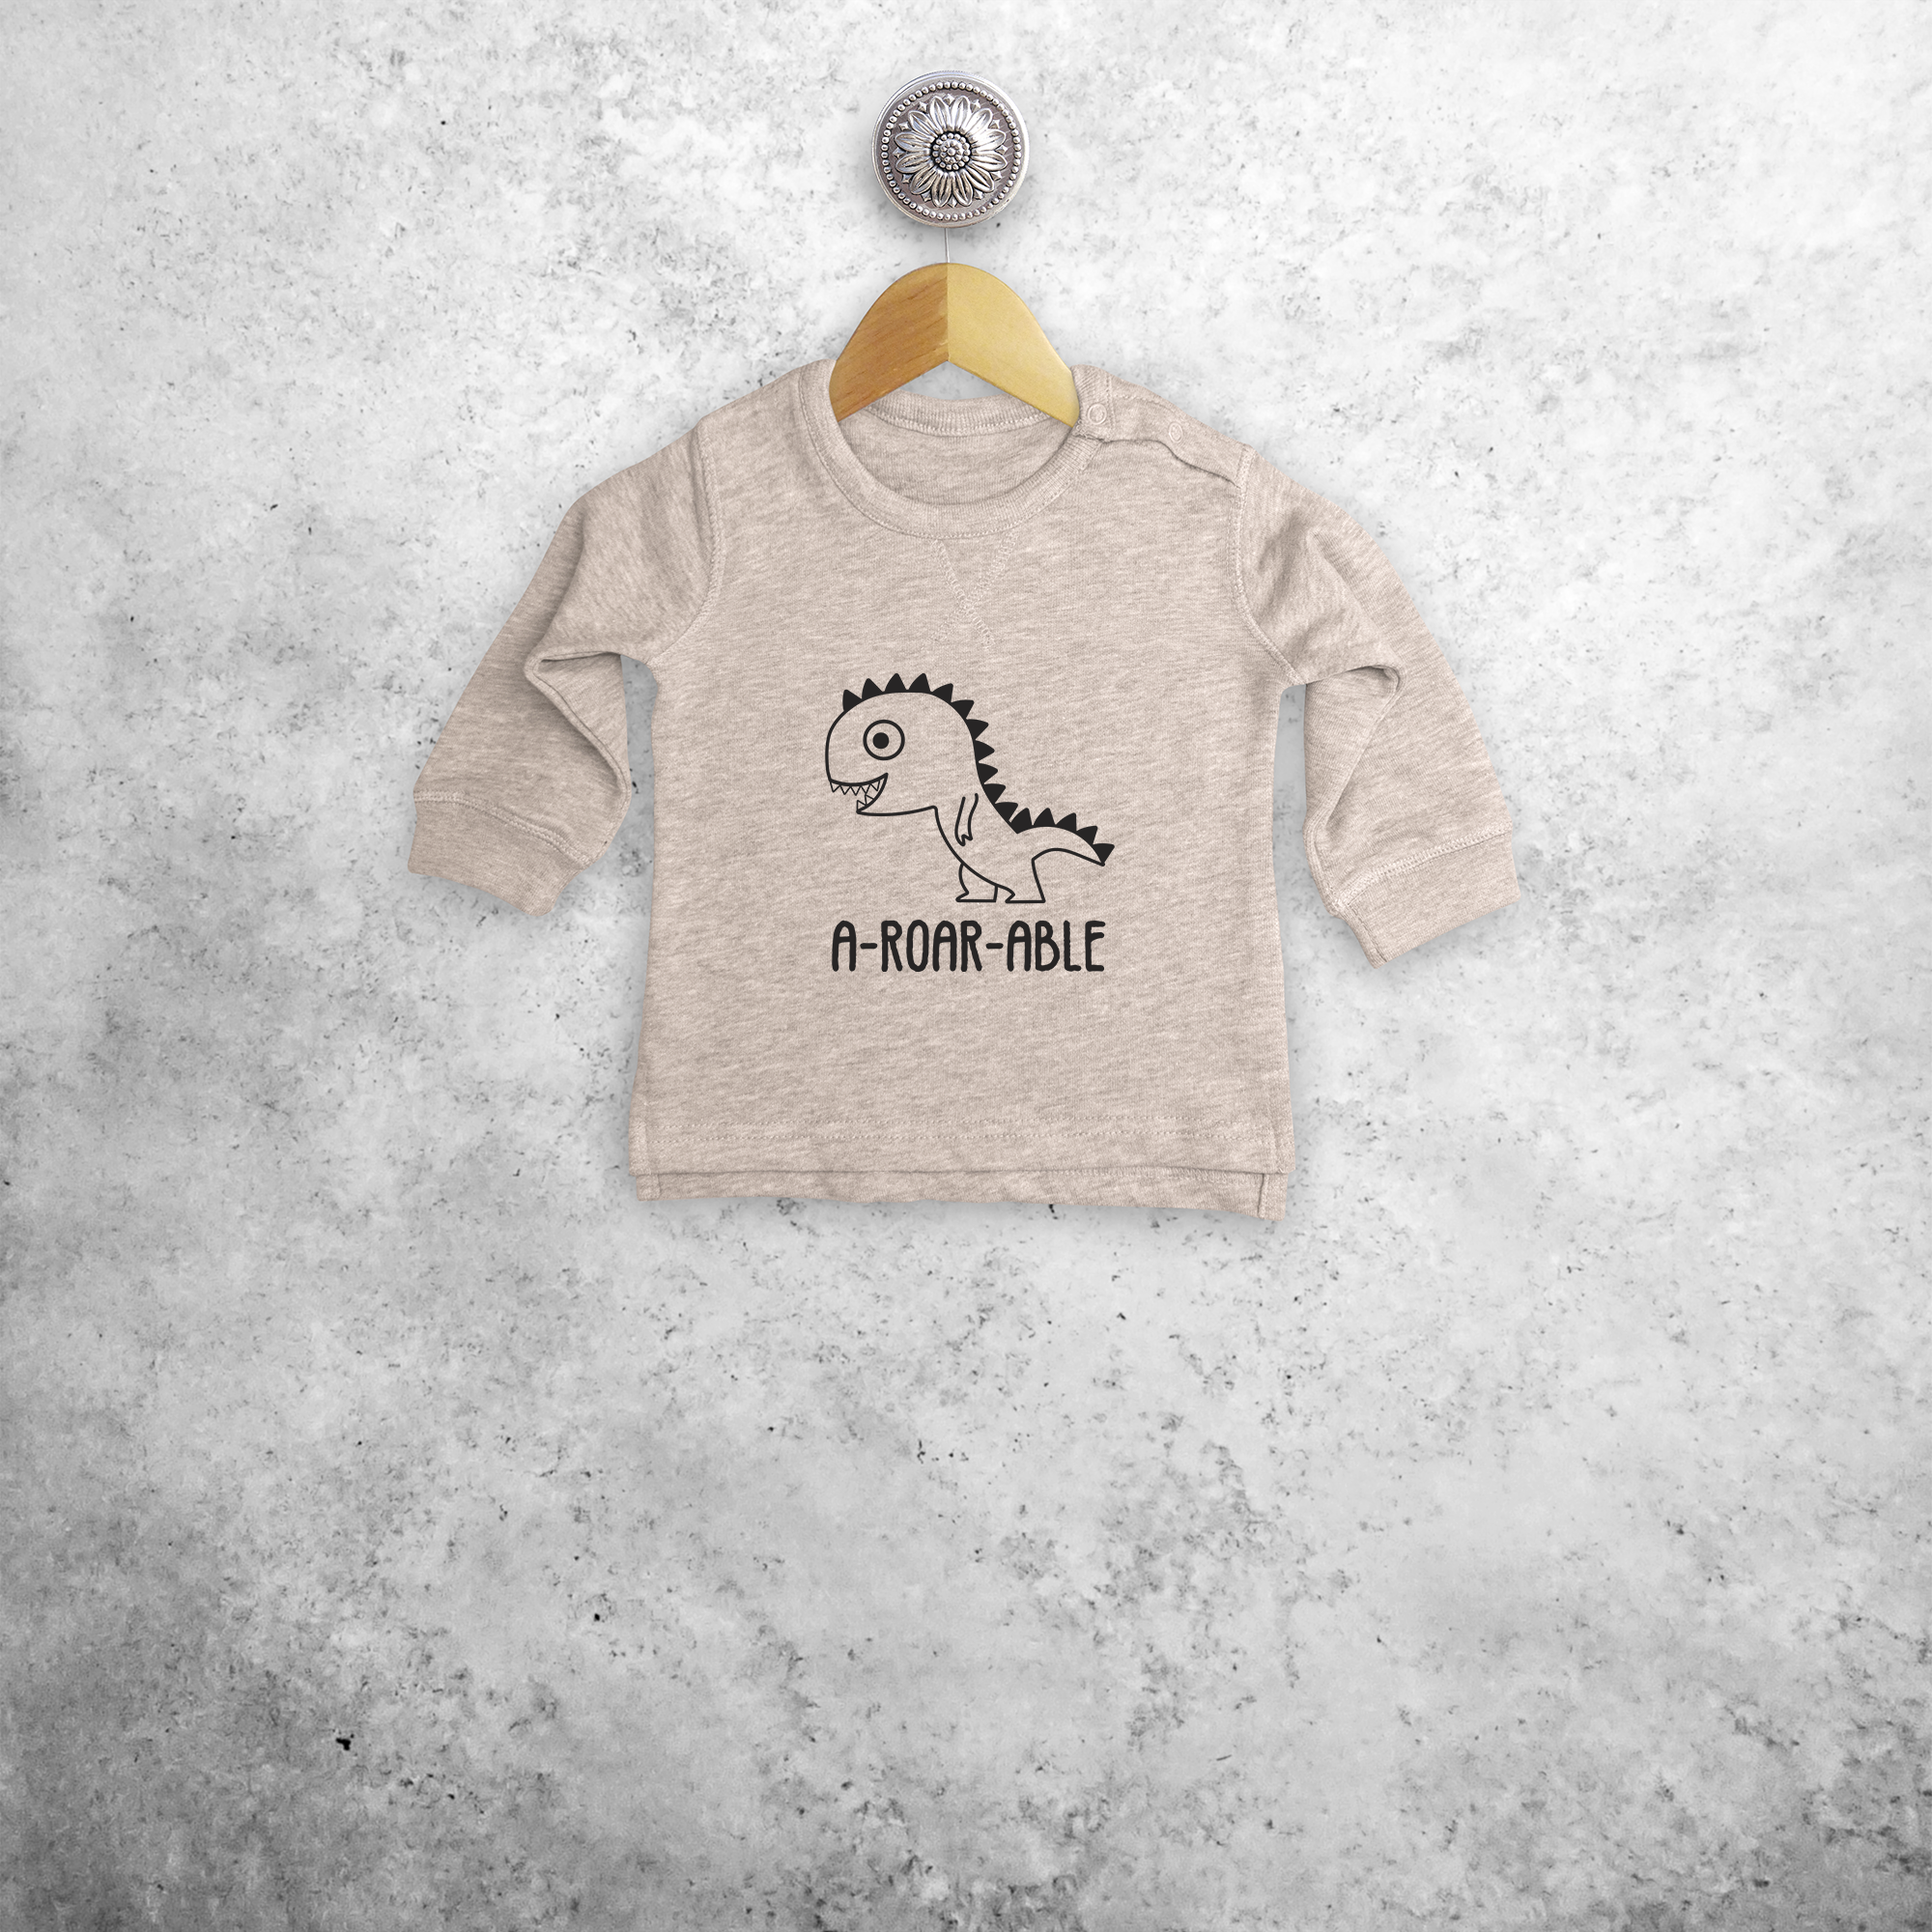 'A-roar-able' baby sweater